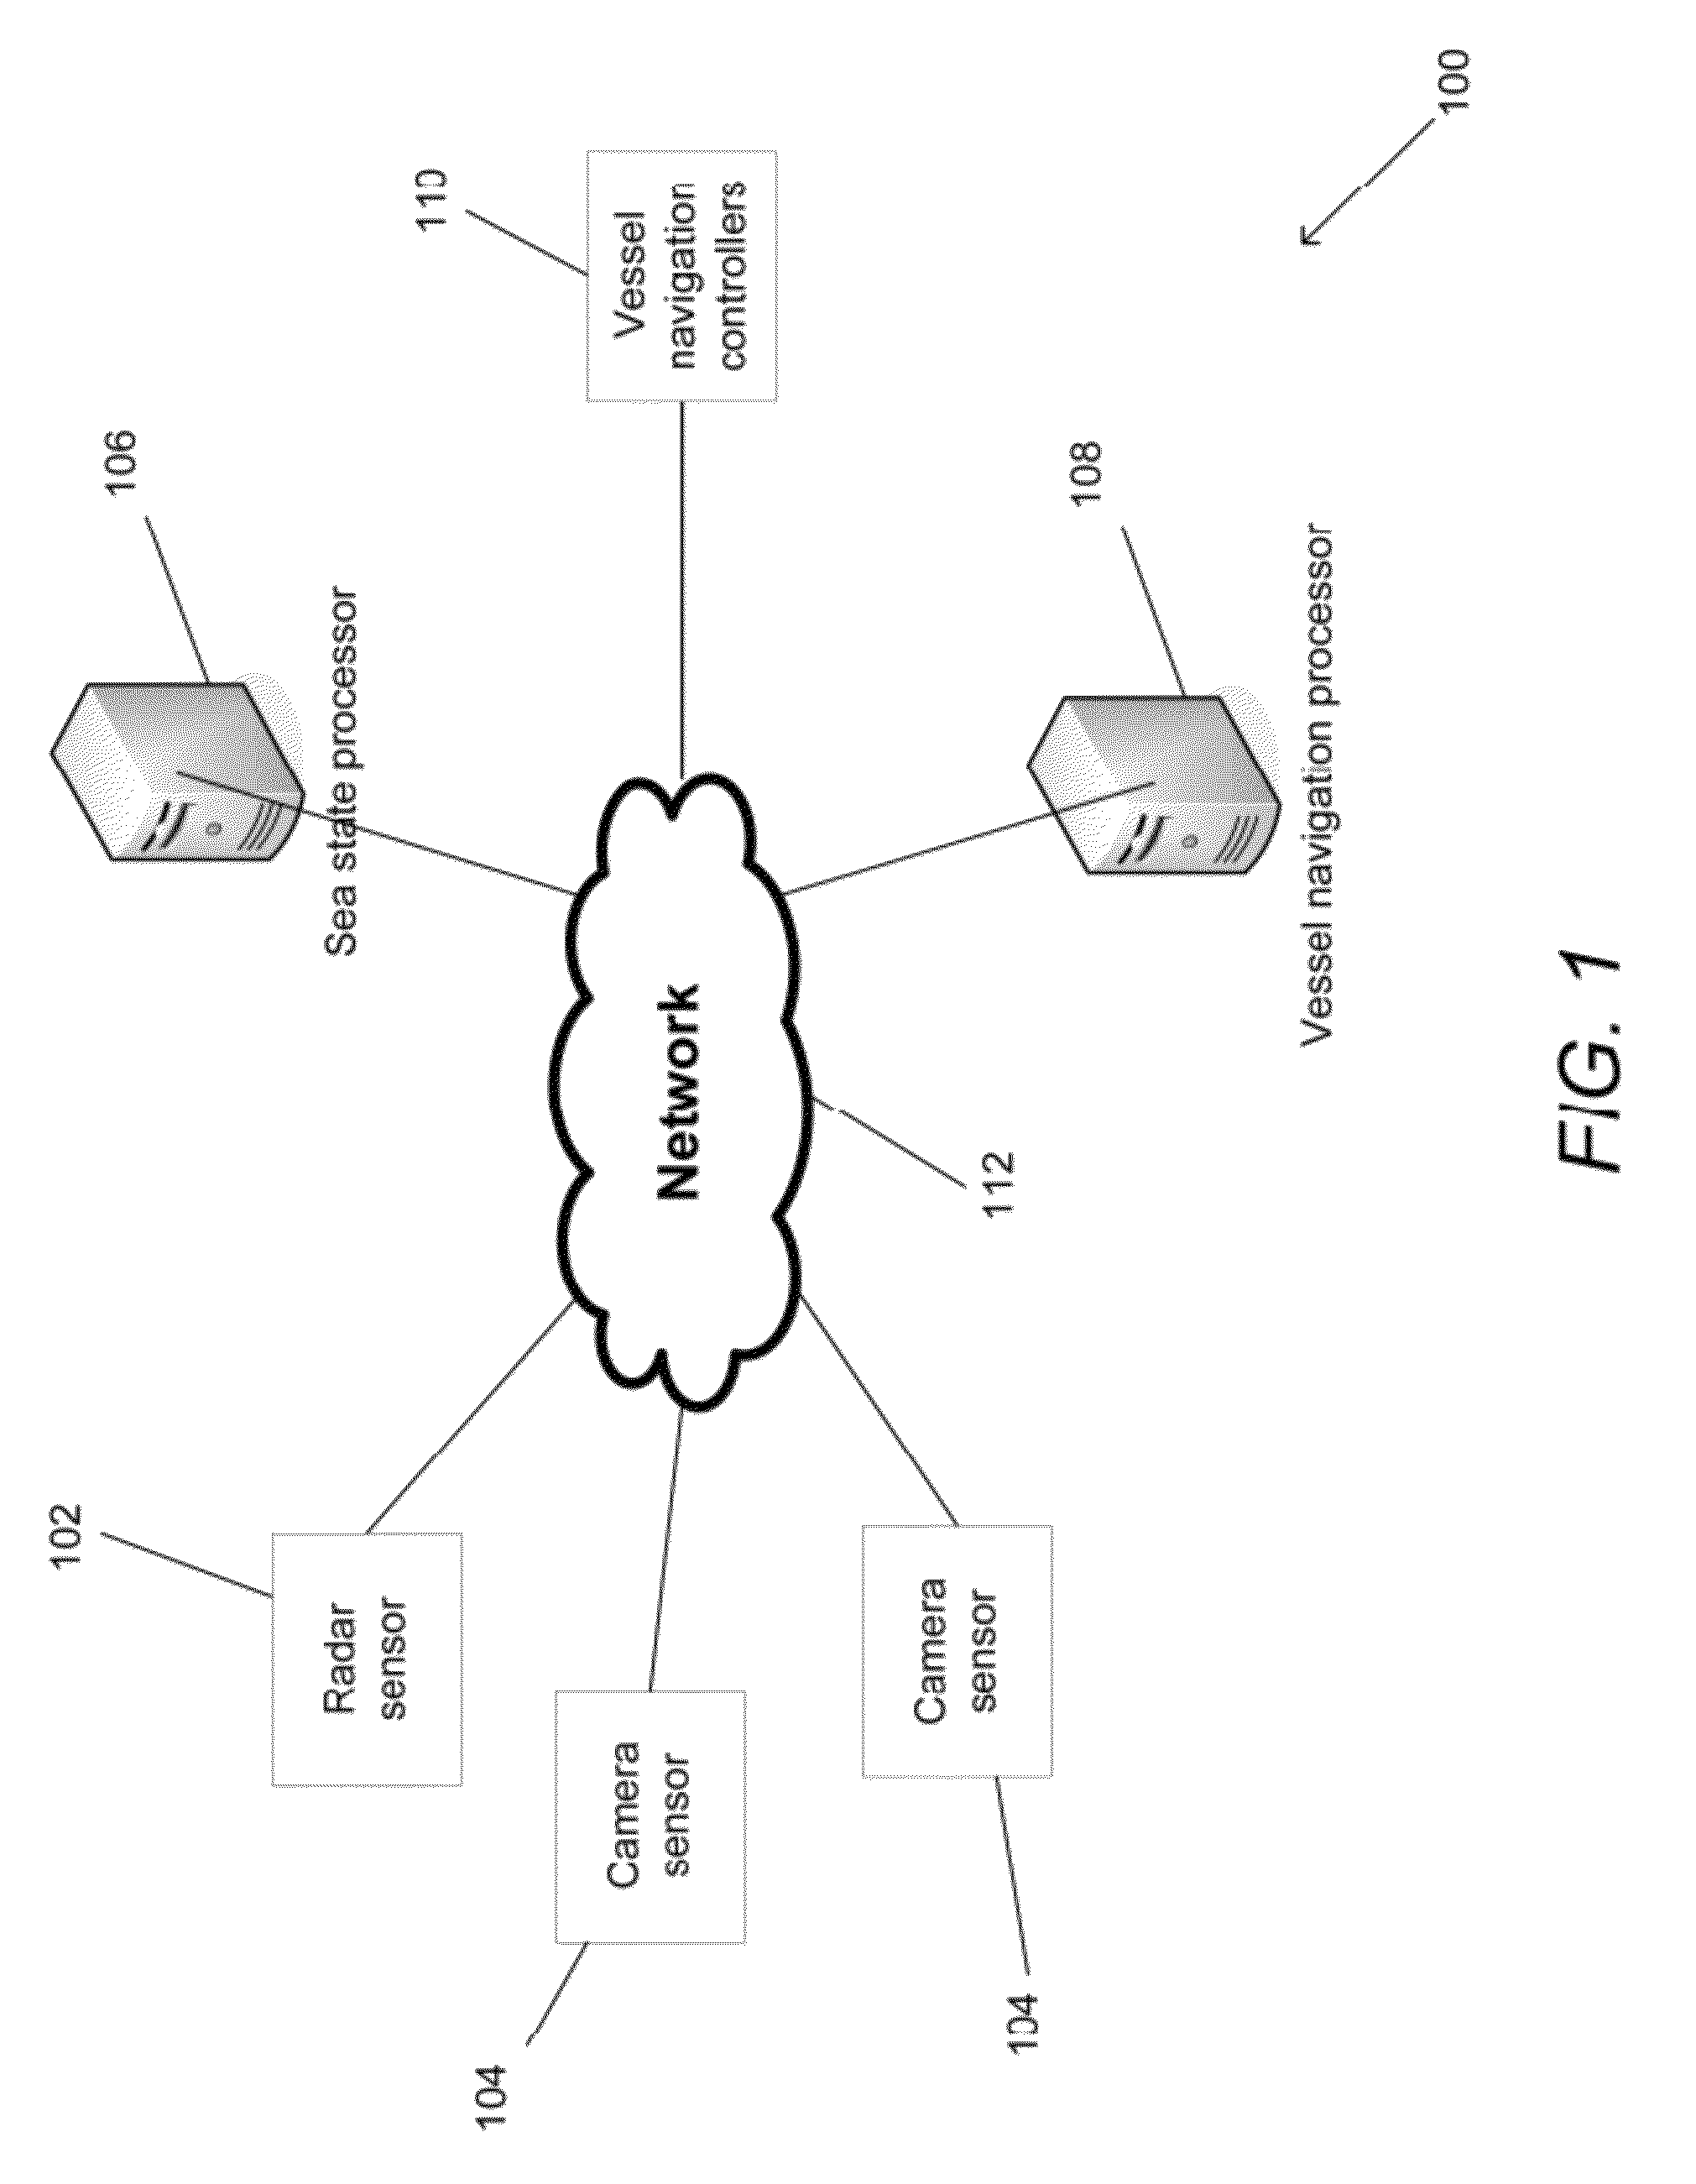 Systems and methods for automated vessel navigation using sea state prediction